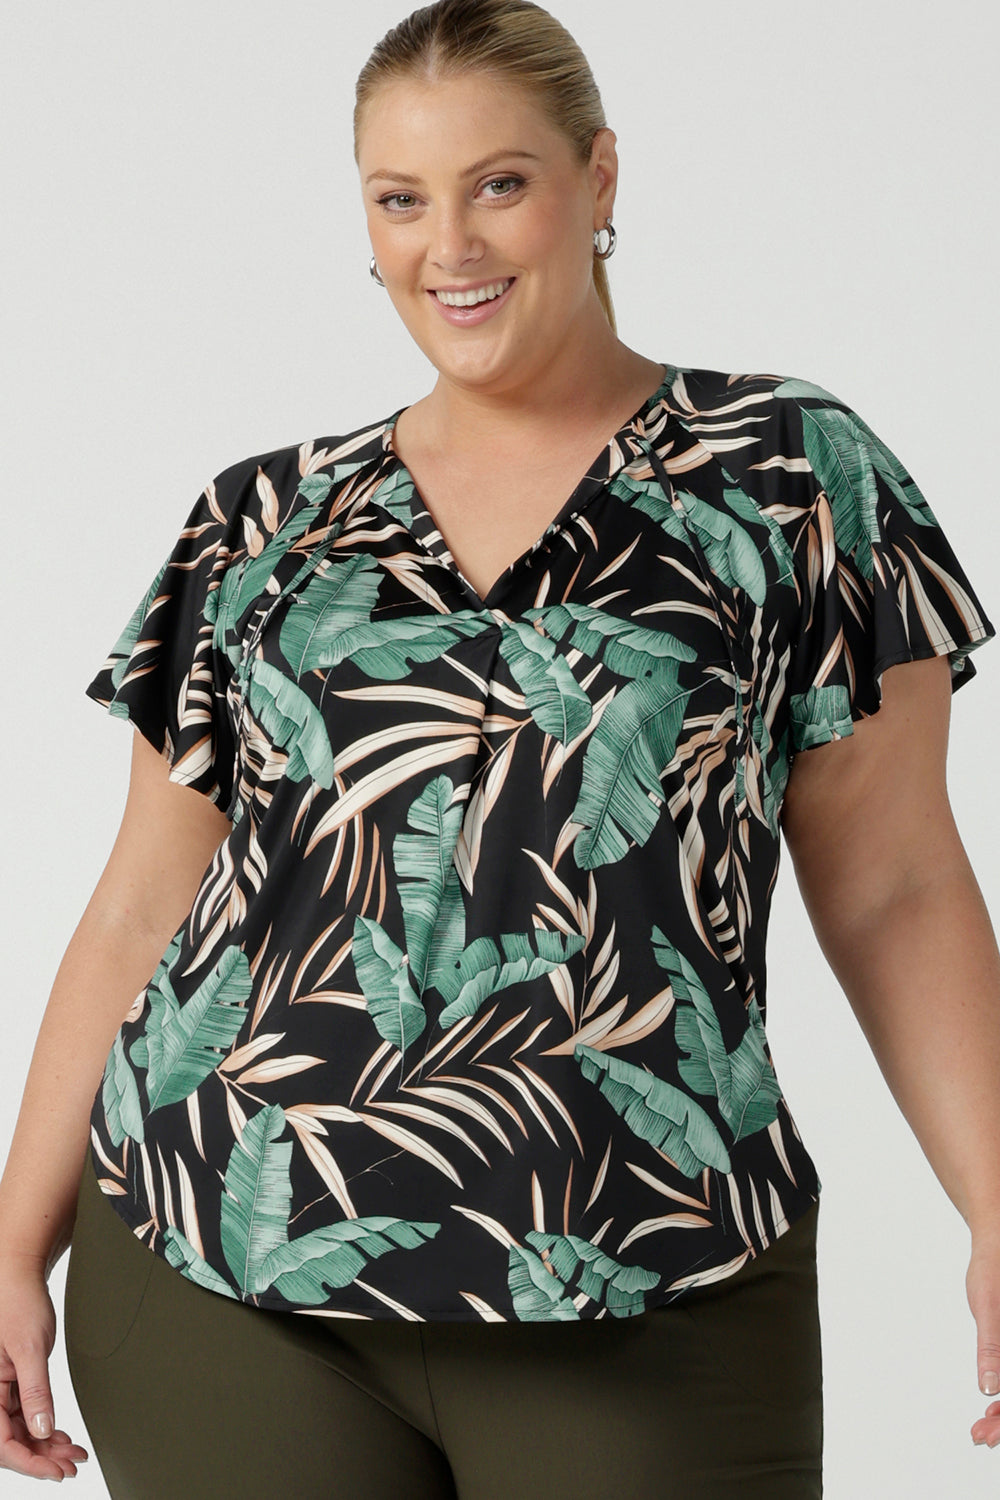 A flutter raglan sleeve jersey top with a flutter sleeve. Featuring a beautiful tropical print on a black background. Lightweight jersey cool to touch and easy care. Size inclusive fashion.